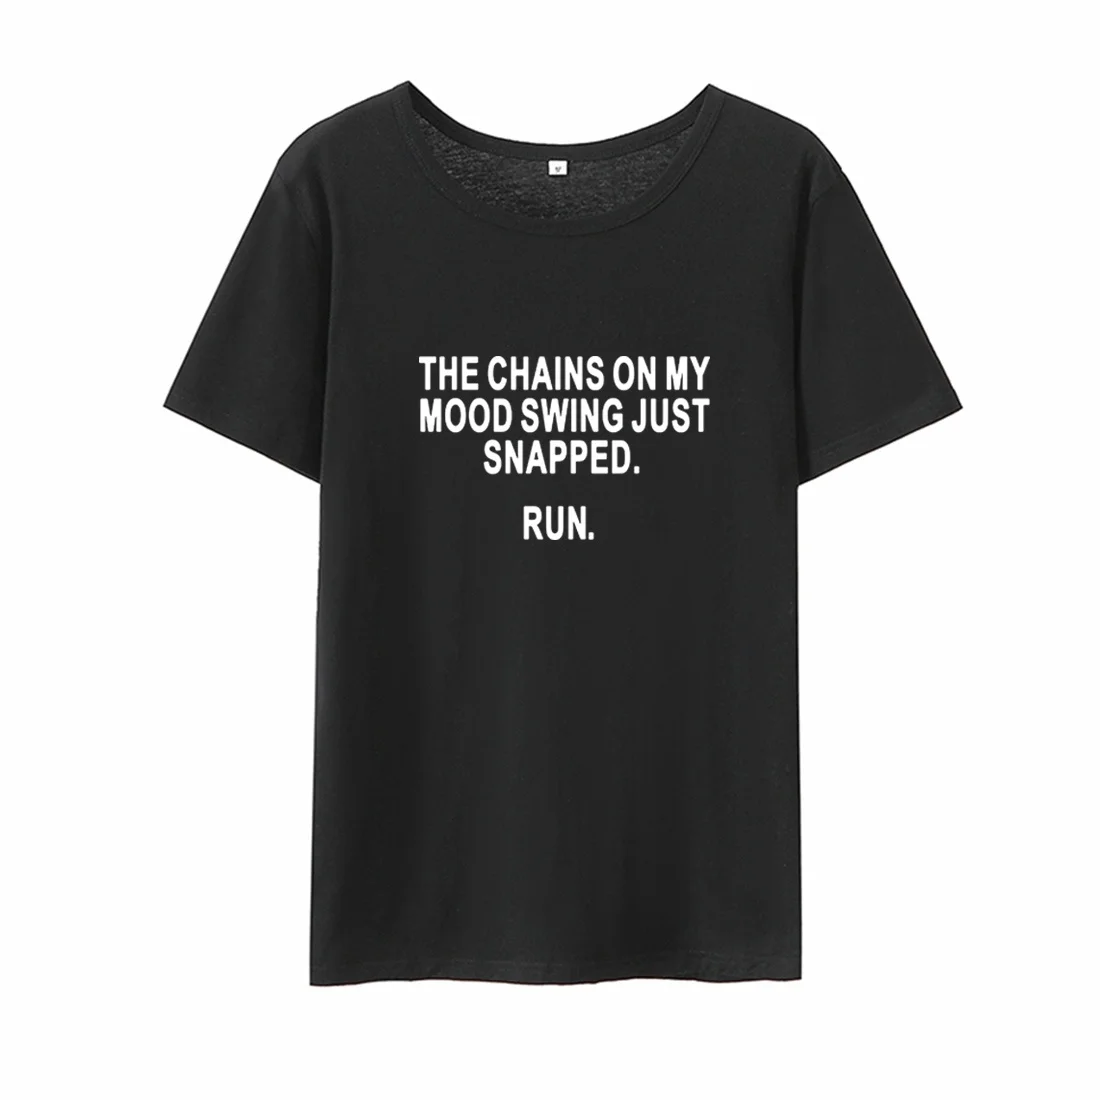 

The Chains on My Mood Swing Just Snapped Printed Tshirt Women Summer Short Sleeve O-neck Ladies Tops Black White Tee Shirt Femme